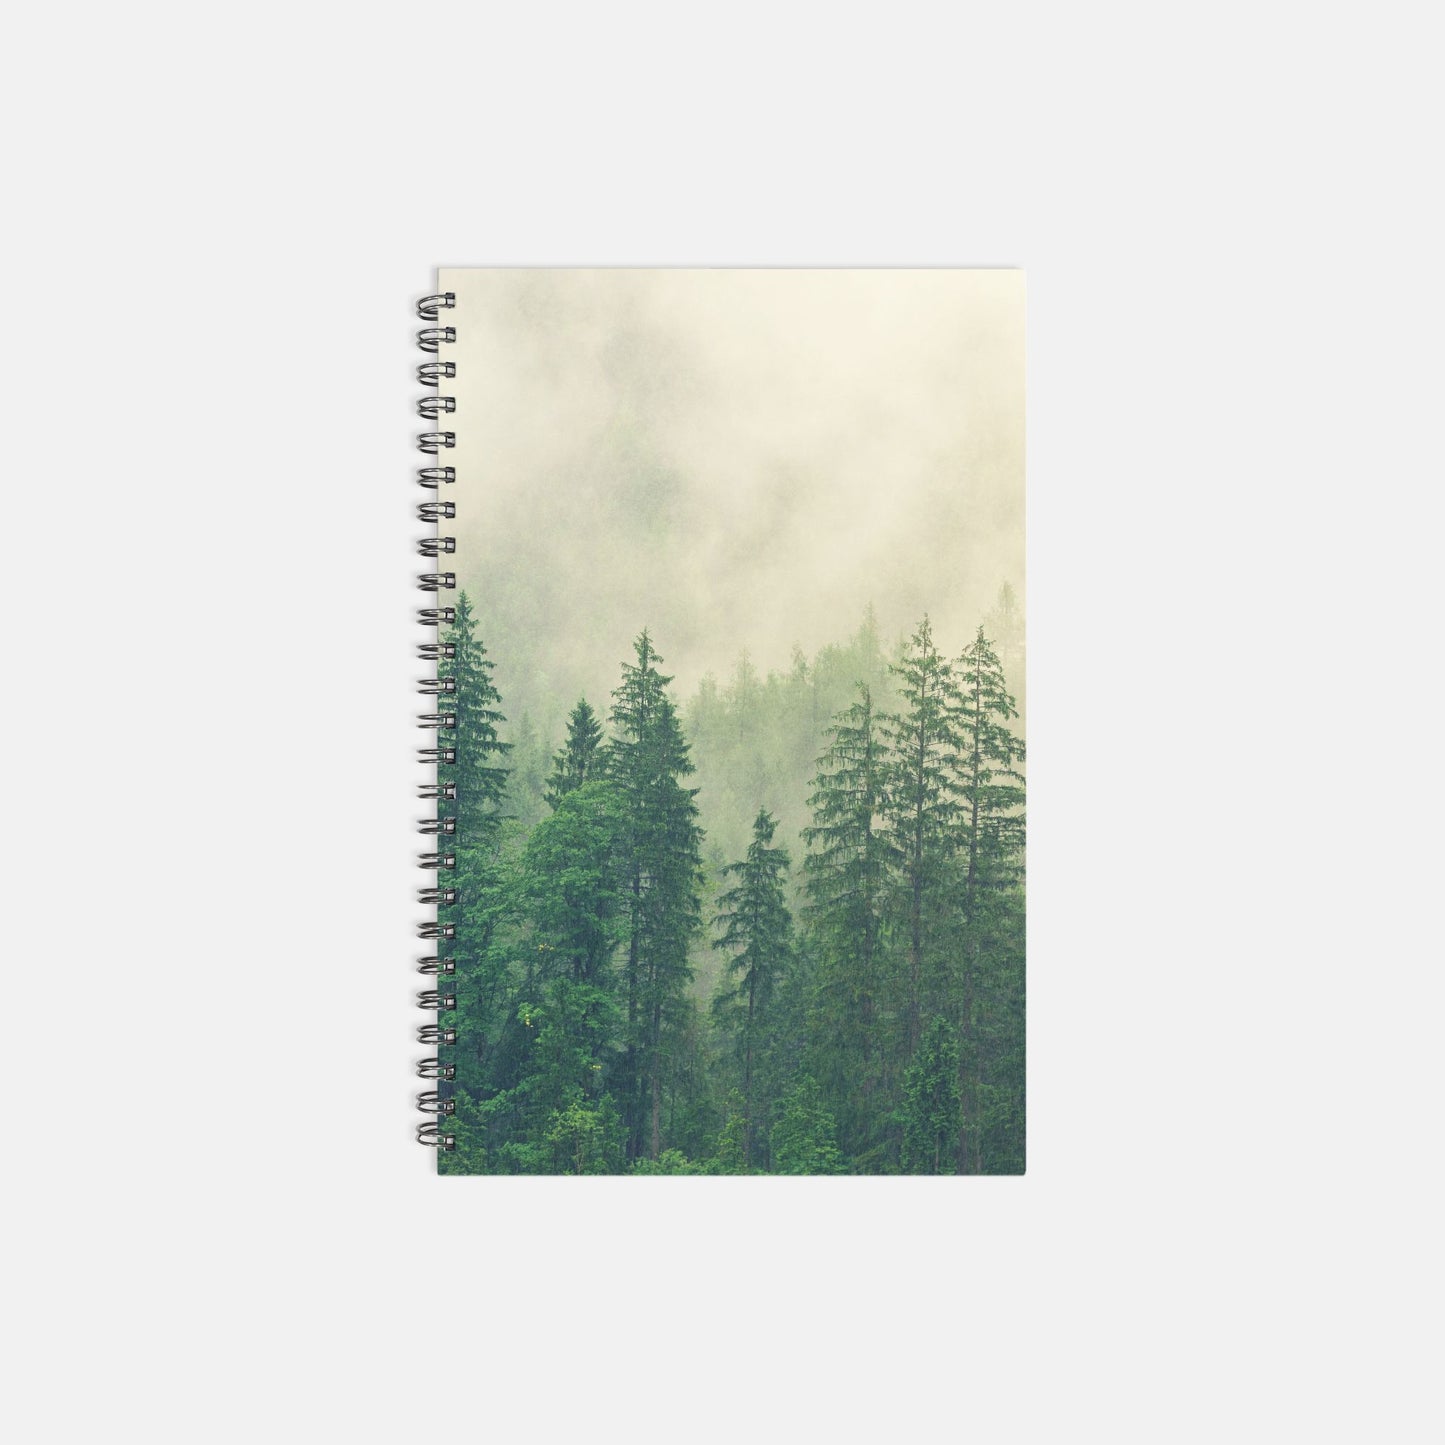 Enchanted Forest Notebook Hardcover Spiral 5.5 x 8.5